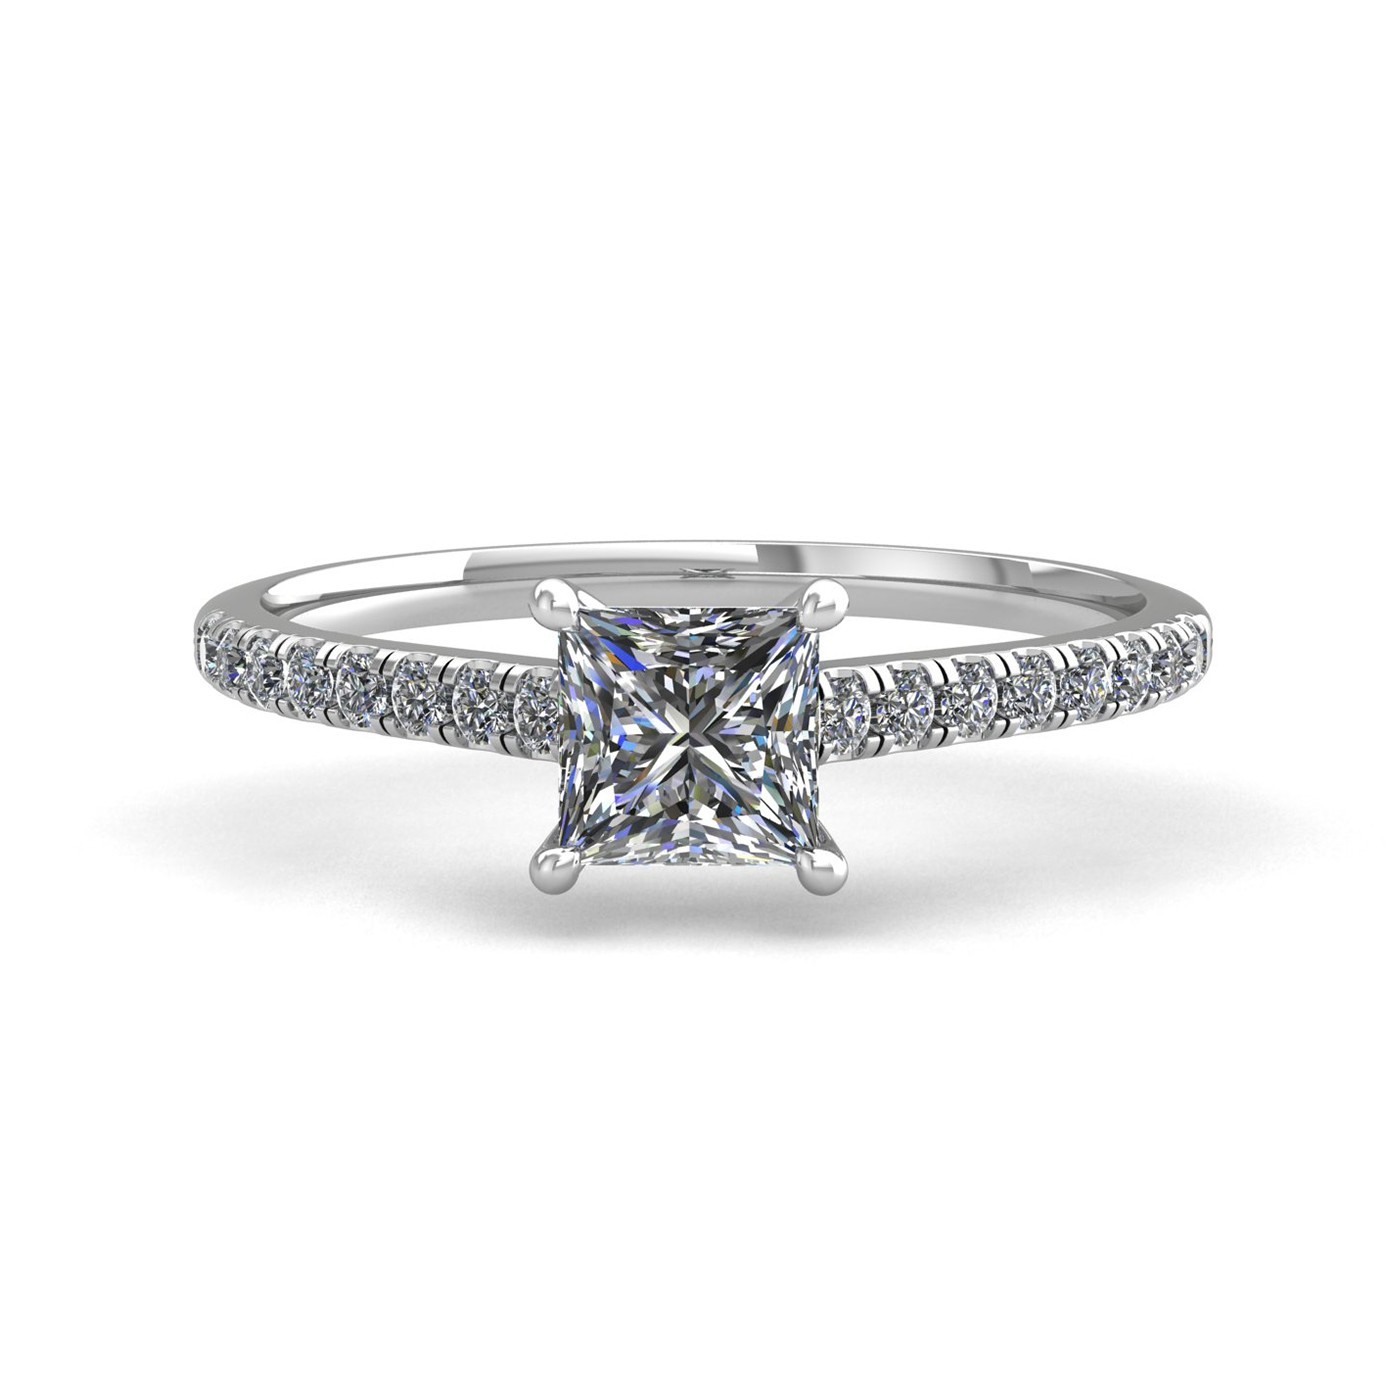 18k white gold 1,00 ct 4 prongs princess cut diamond engagement ring with whisper thin pavÉ set band Photos & images